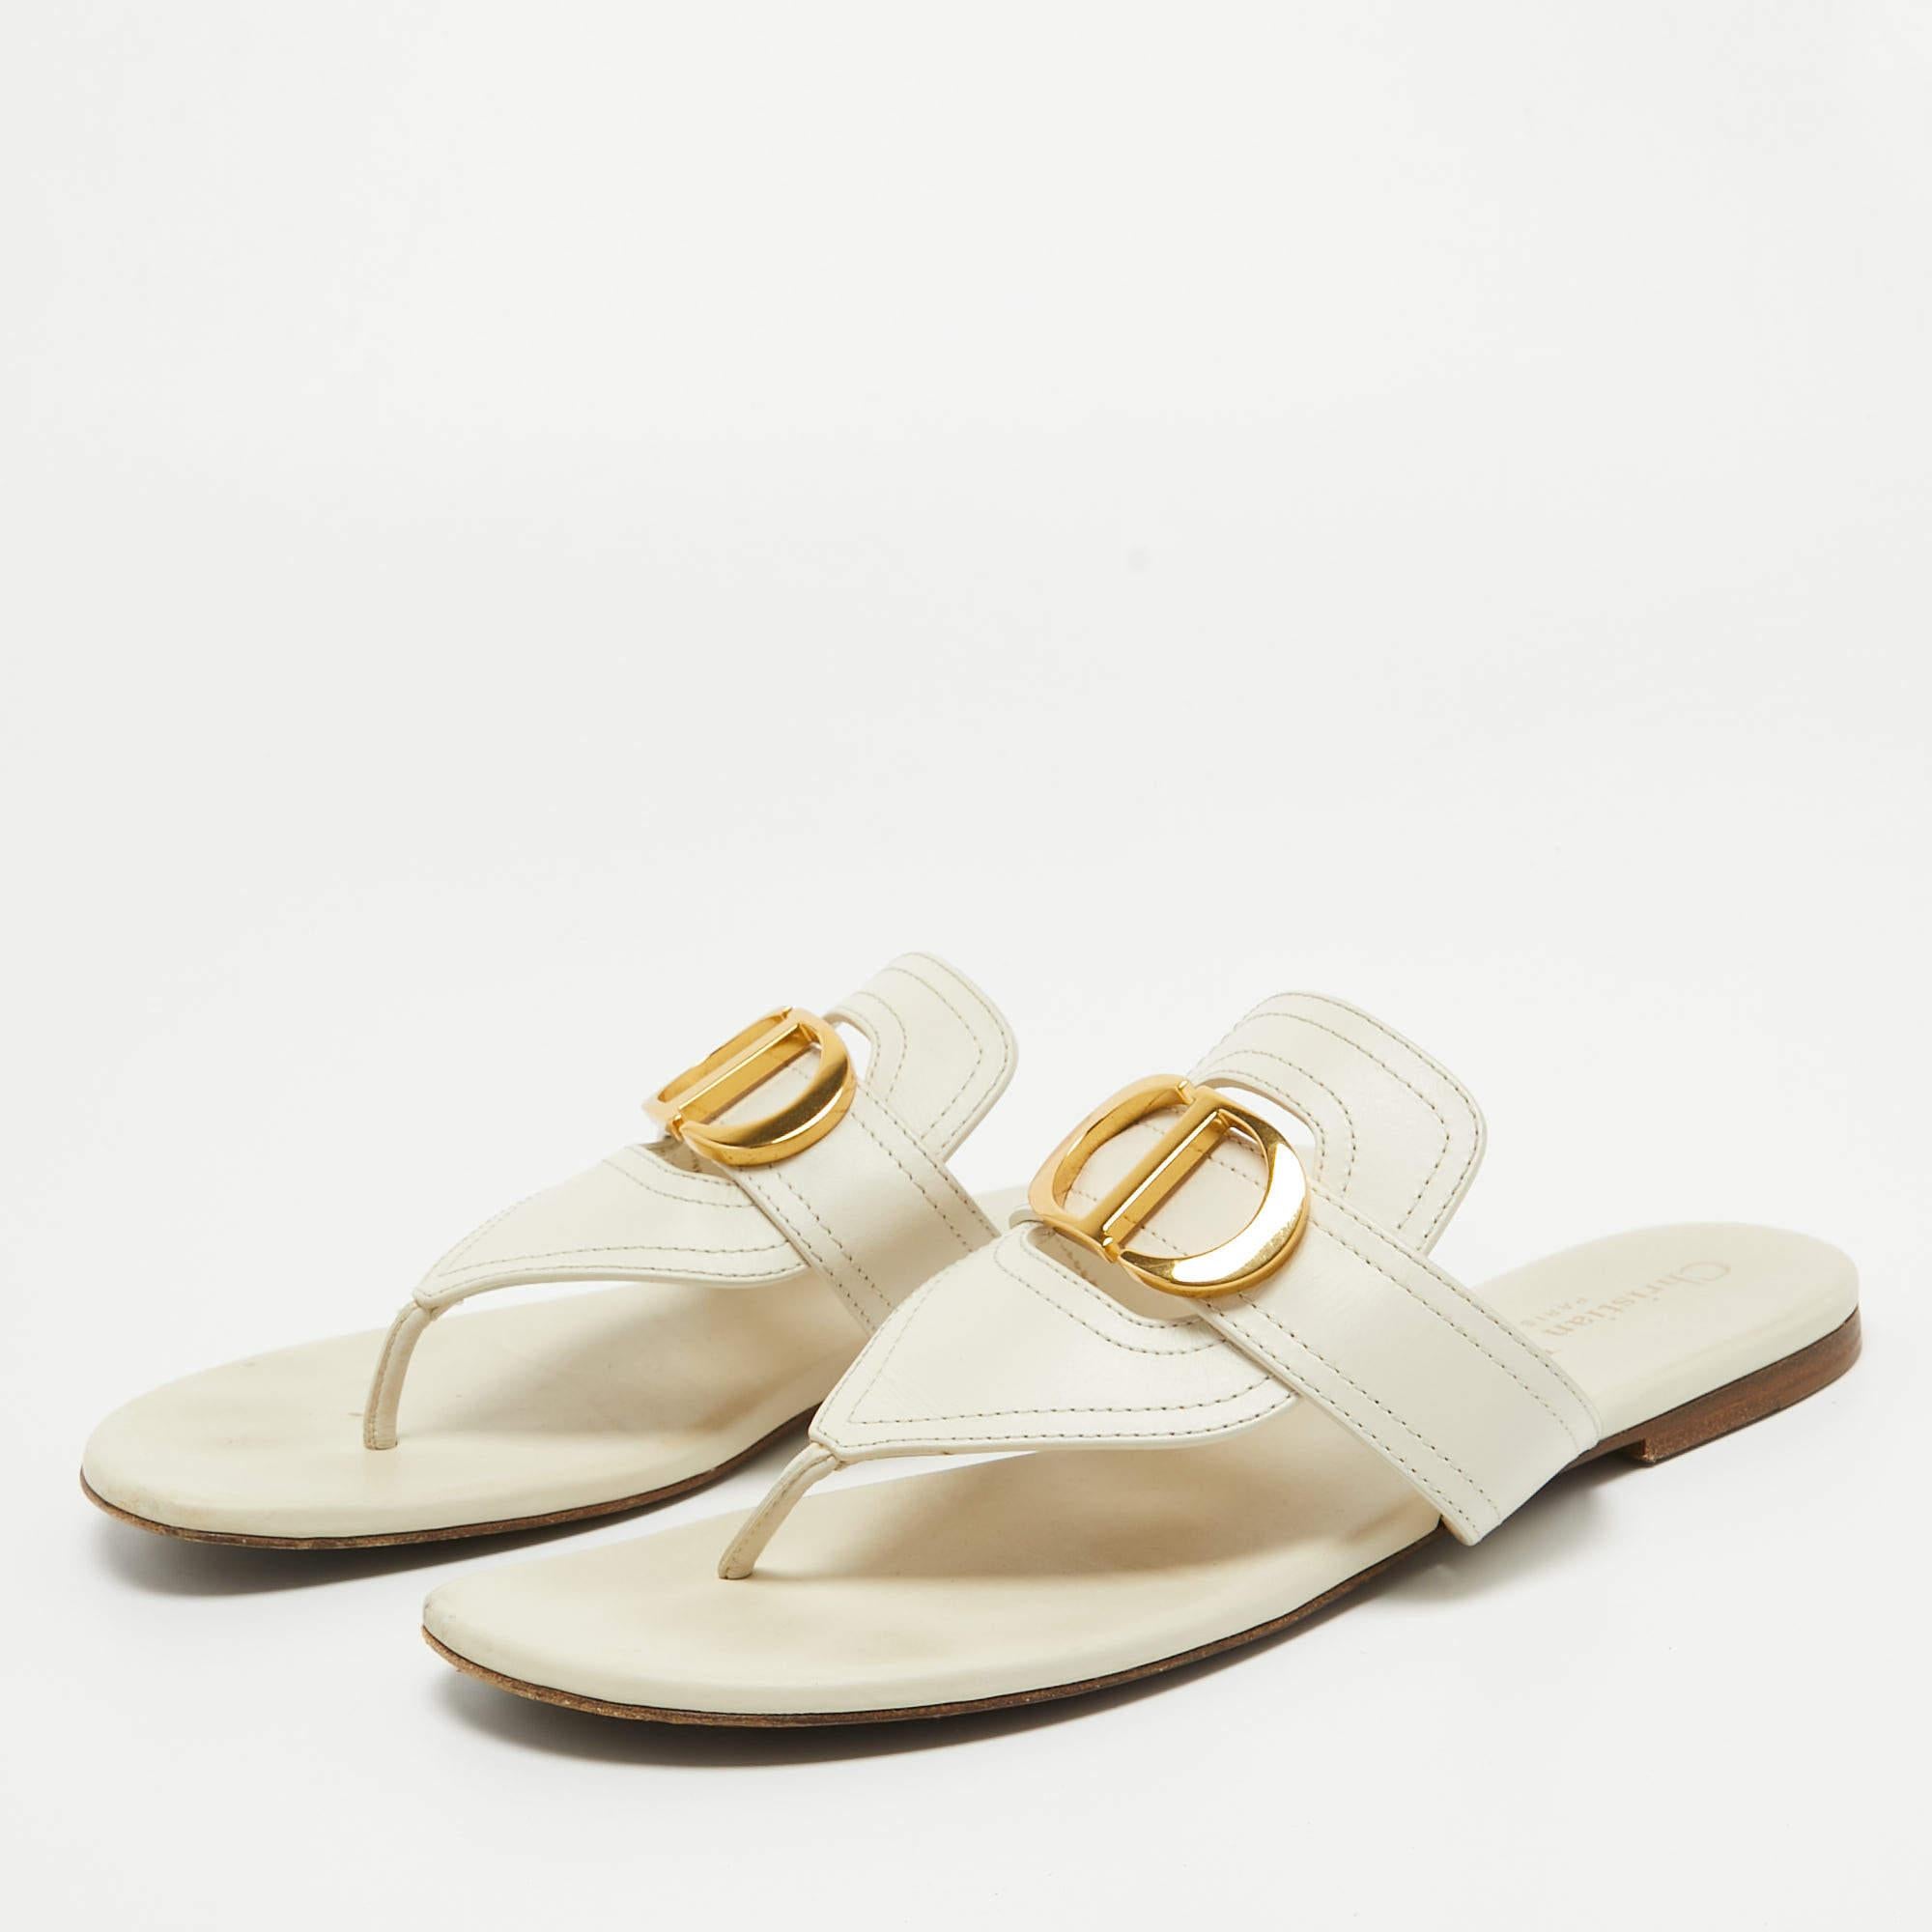 Dior packs the 30 Montaigne flat slide with classic elements and comfort, calling it an 'essential Dior wardrobe piece'. These leather flats feature open toes, the 'CD' logo on the uppers in gold-tone metal, and durable leather soles.

